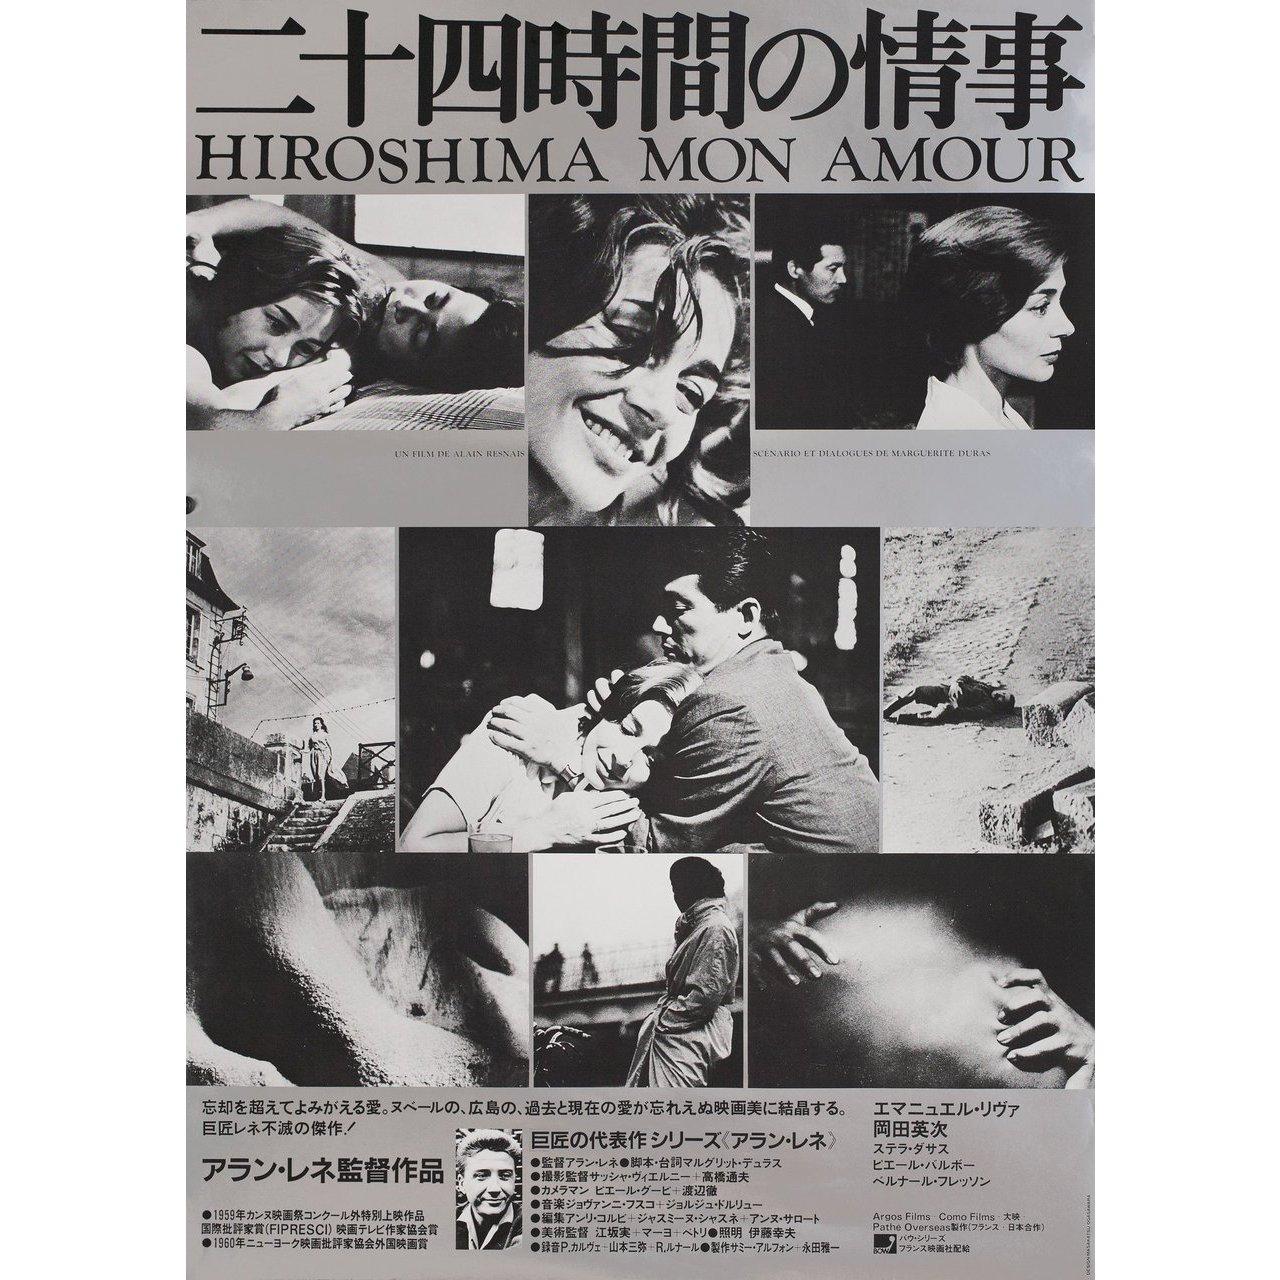 Original 1978 re-release Japanese B2 poster by Masakatsu Ogasawara for the 1959 film Hiroshima Mon Amour directed by Alain Resnais with Emmanuelle Riva / Eiji Okada / Stella Dallas / Pierre Barbaud. Very Good-Fine condition, rolled. Please note: the